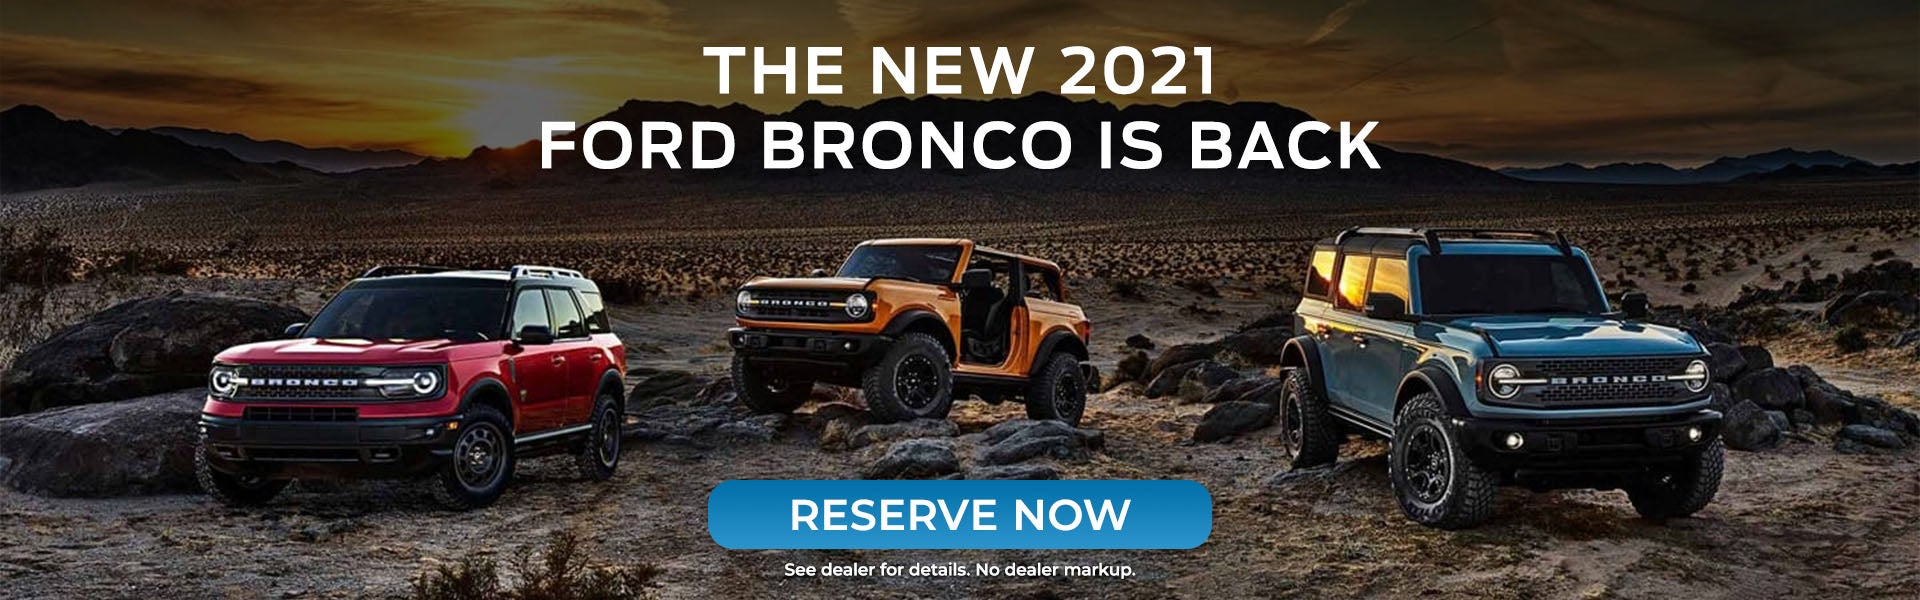 Reserve Your 2021 Ford Bronco